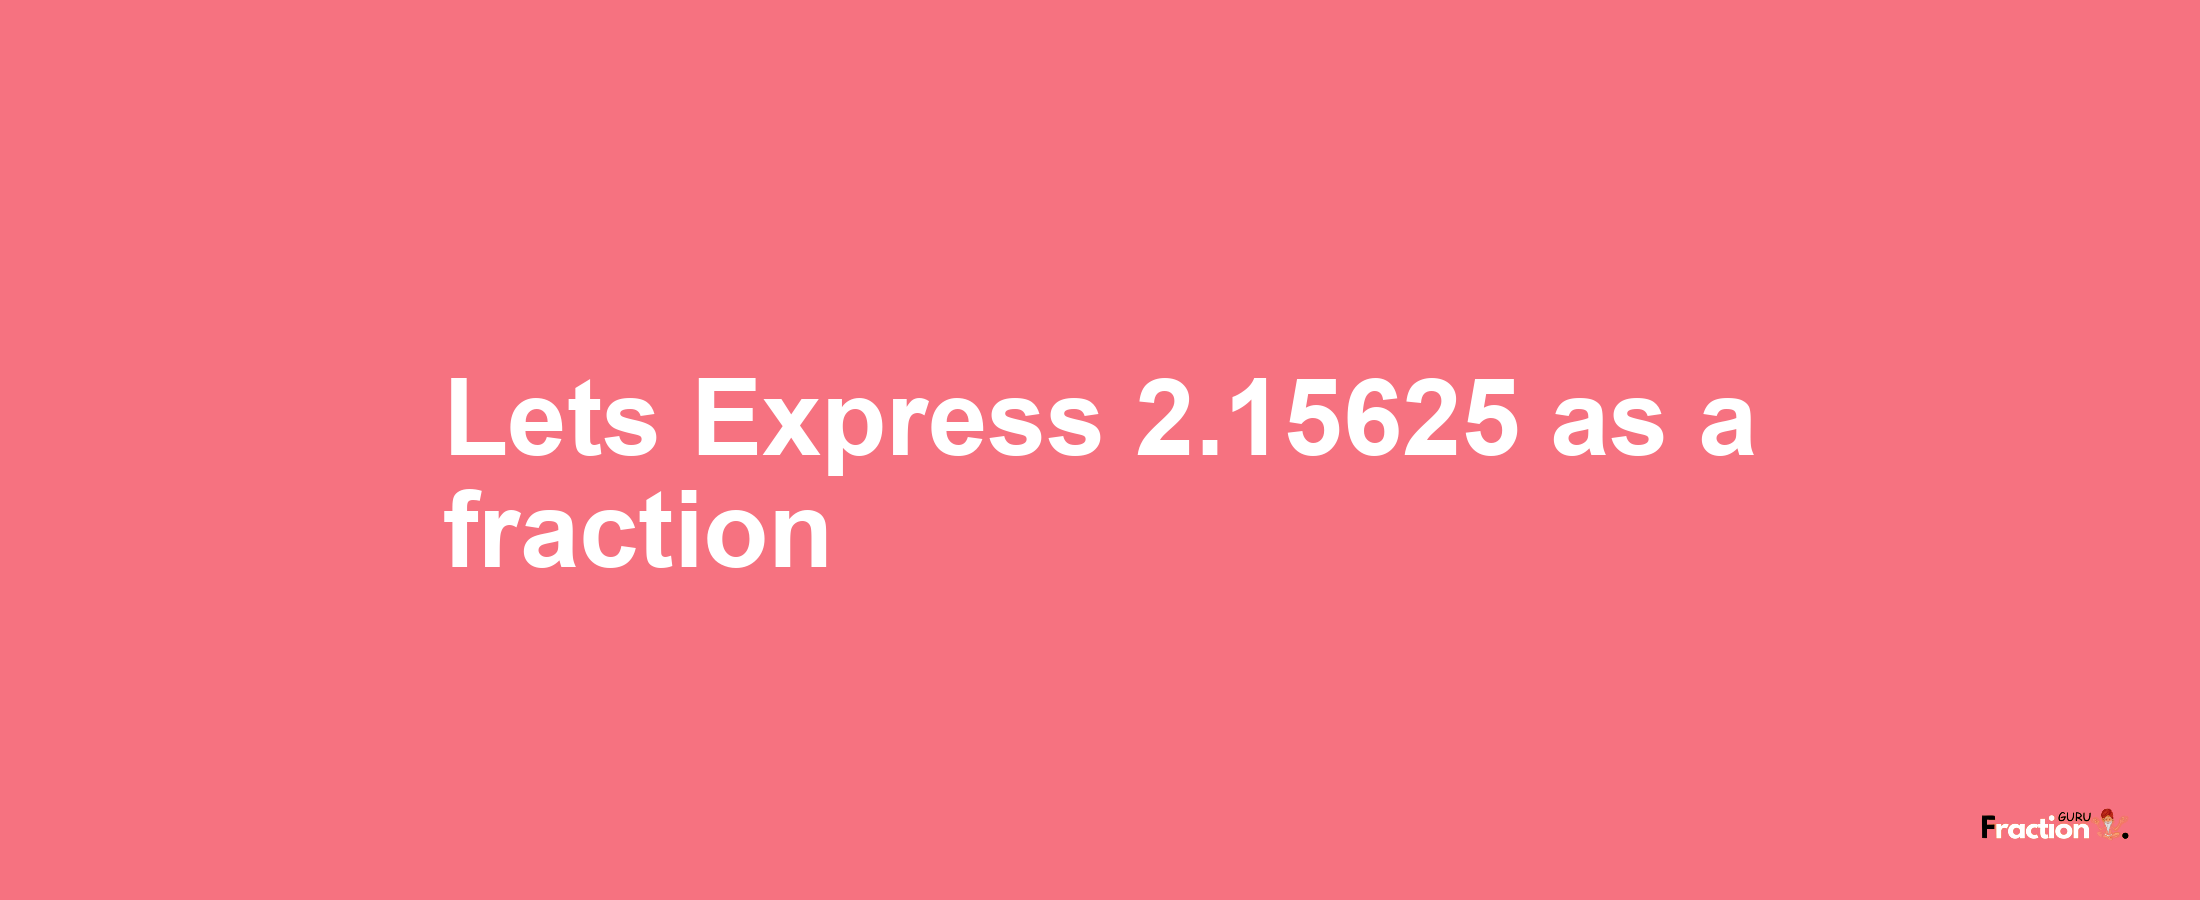 Lets Express 2.15625 as afraction